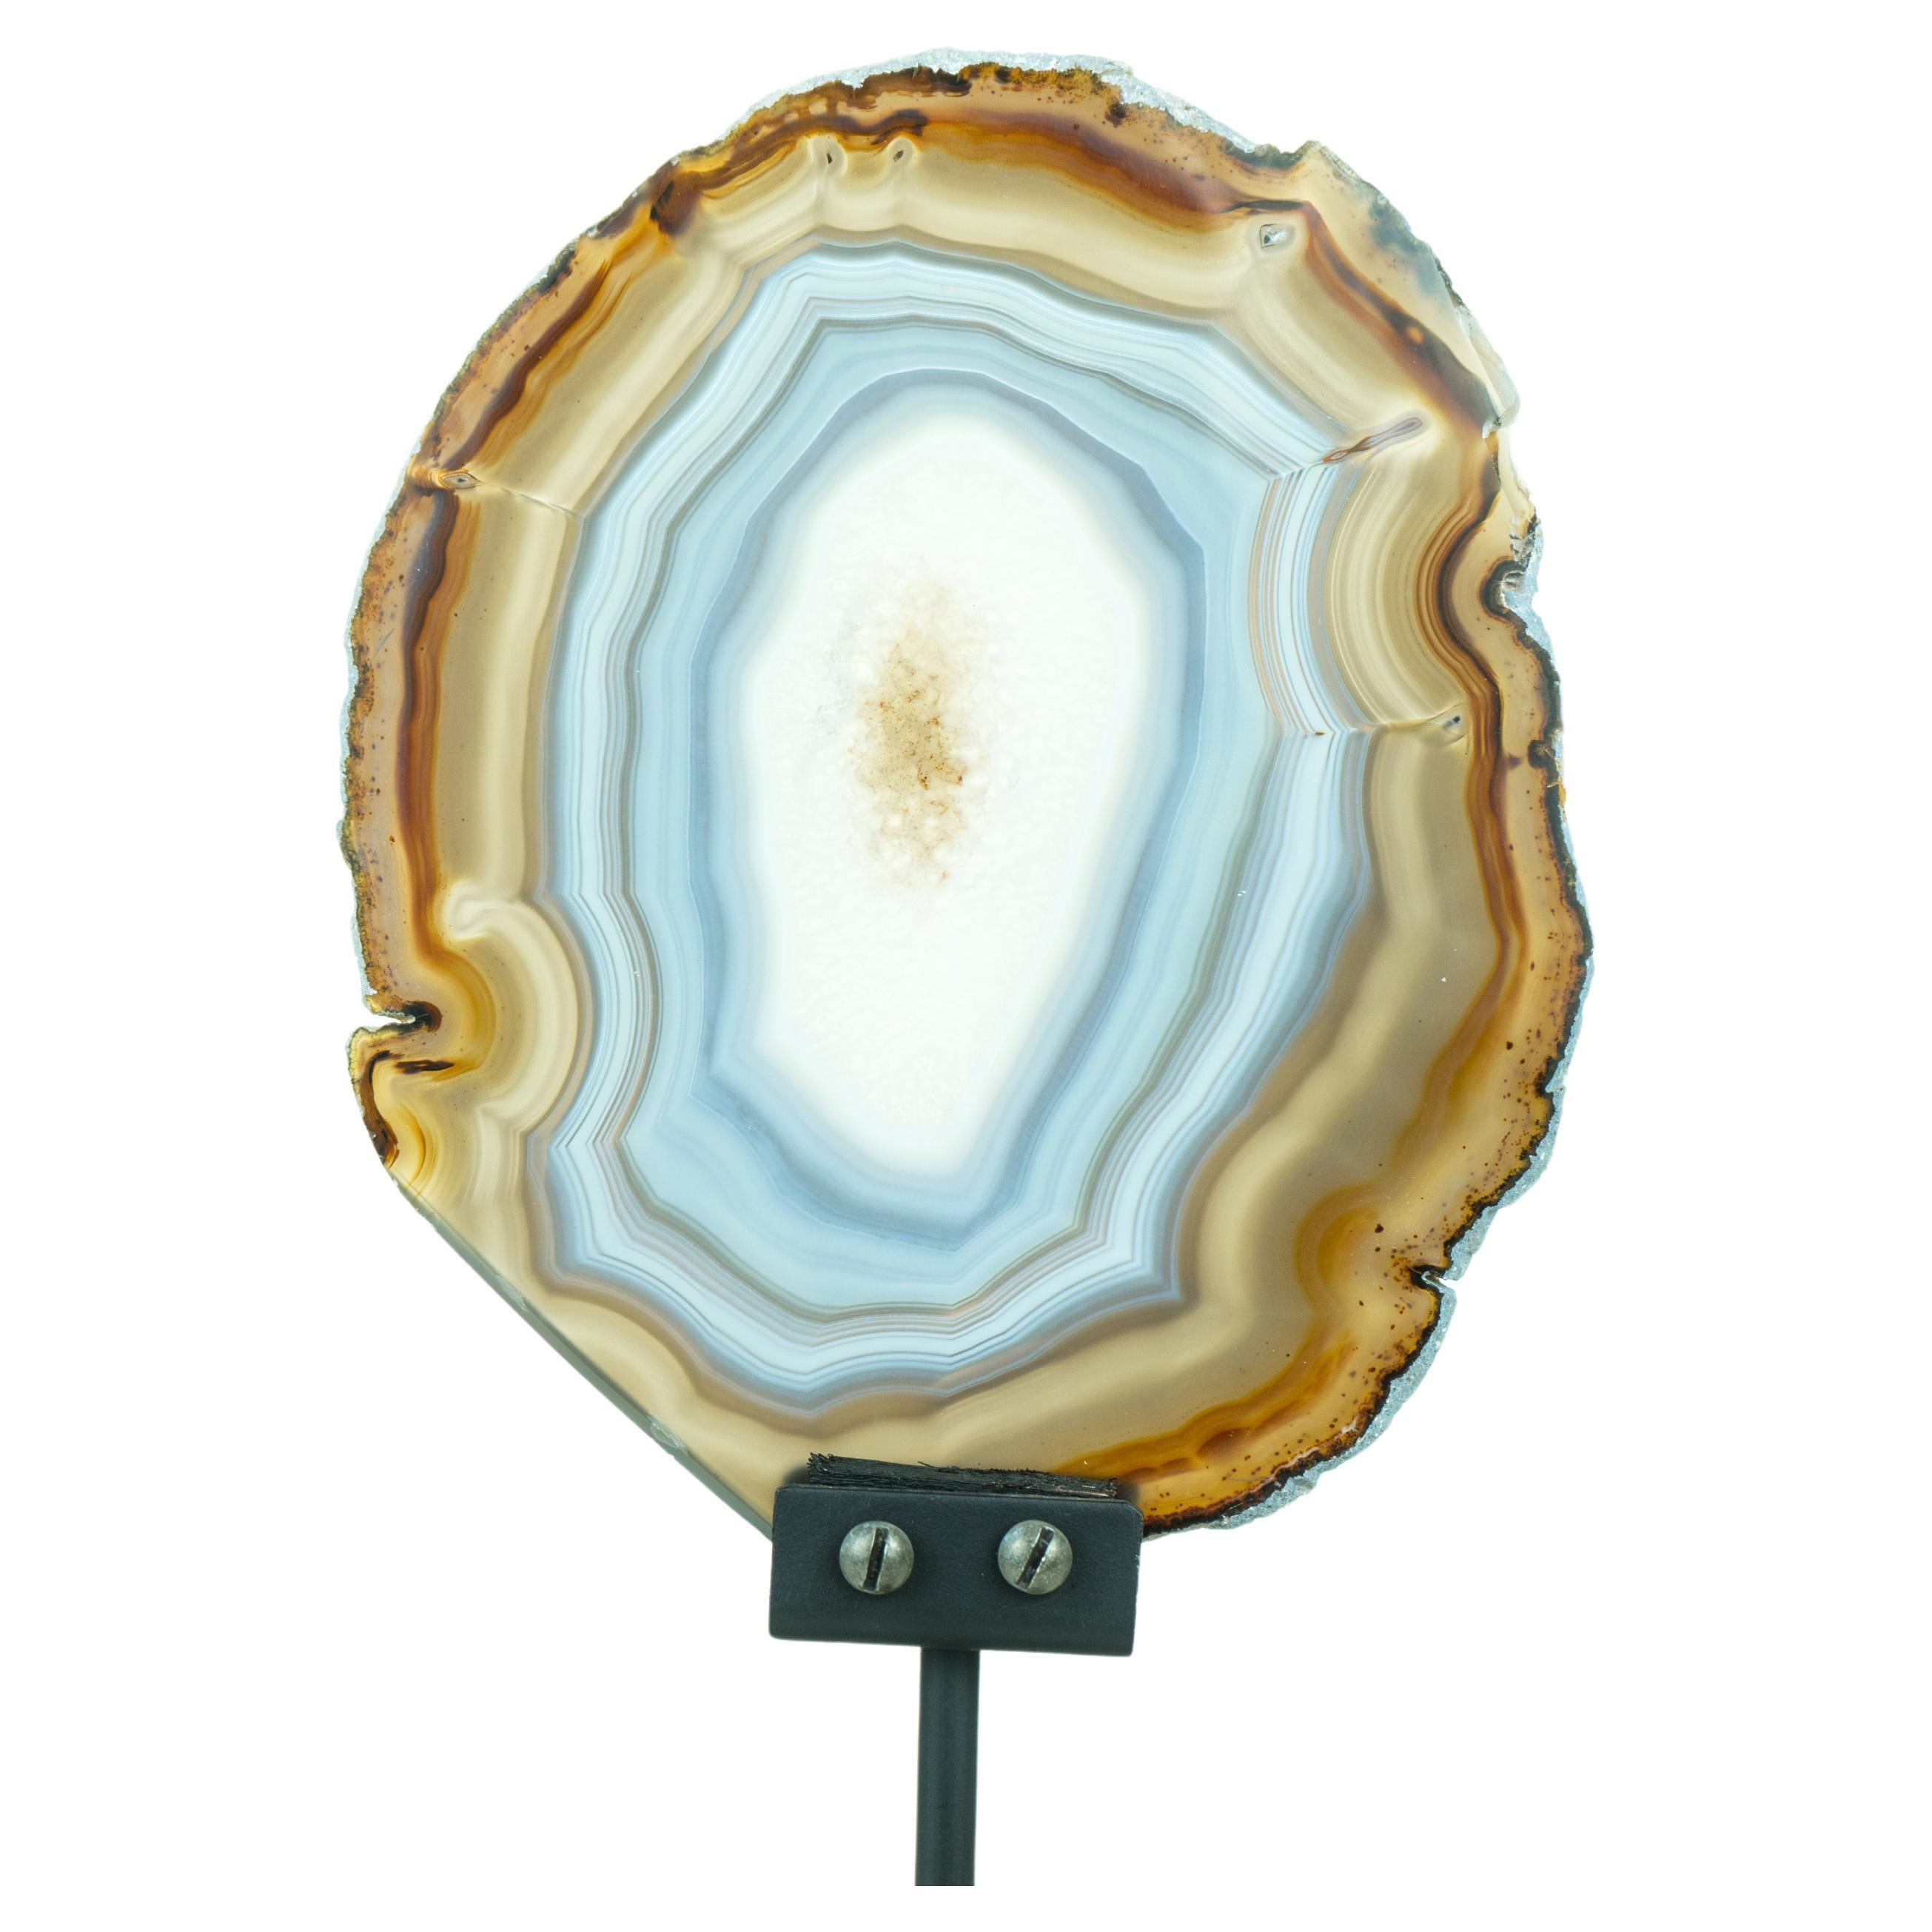 A world-class, rare Blue and Amber Agate Slice, showcasing a rare iridescent effect. This exceptional piece showcases a rarely seen color scheme, and iridescent effect, as well as has beautiful aesthetics. It's surely a sophisticated decor item for